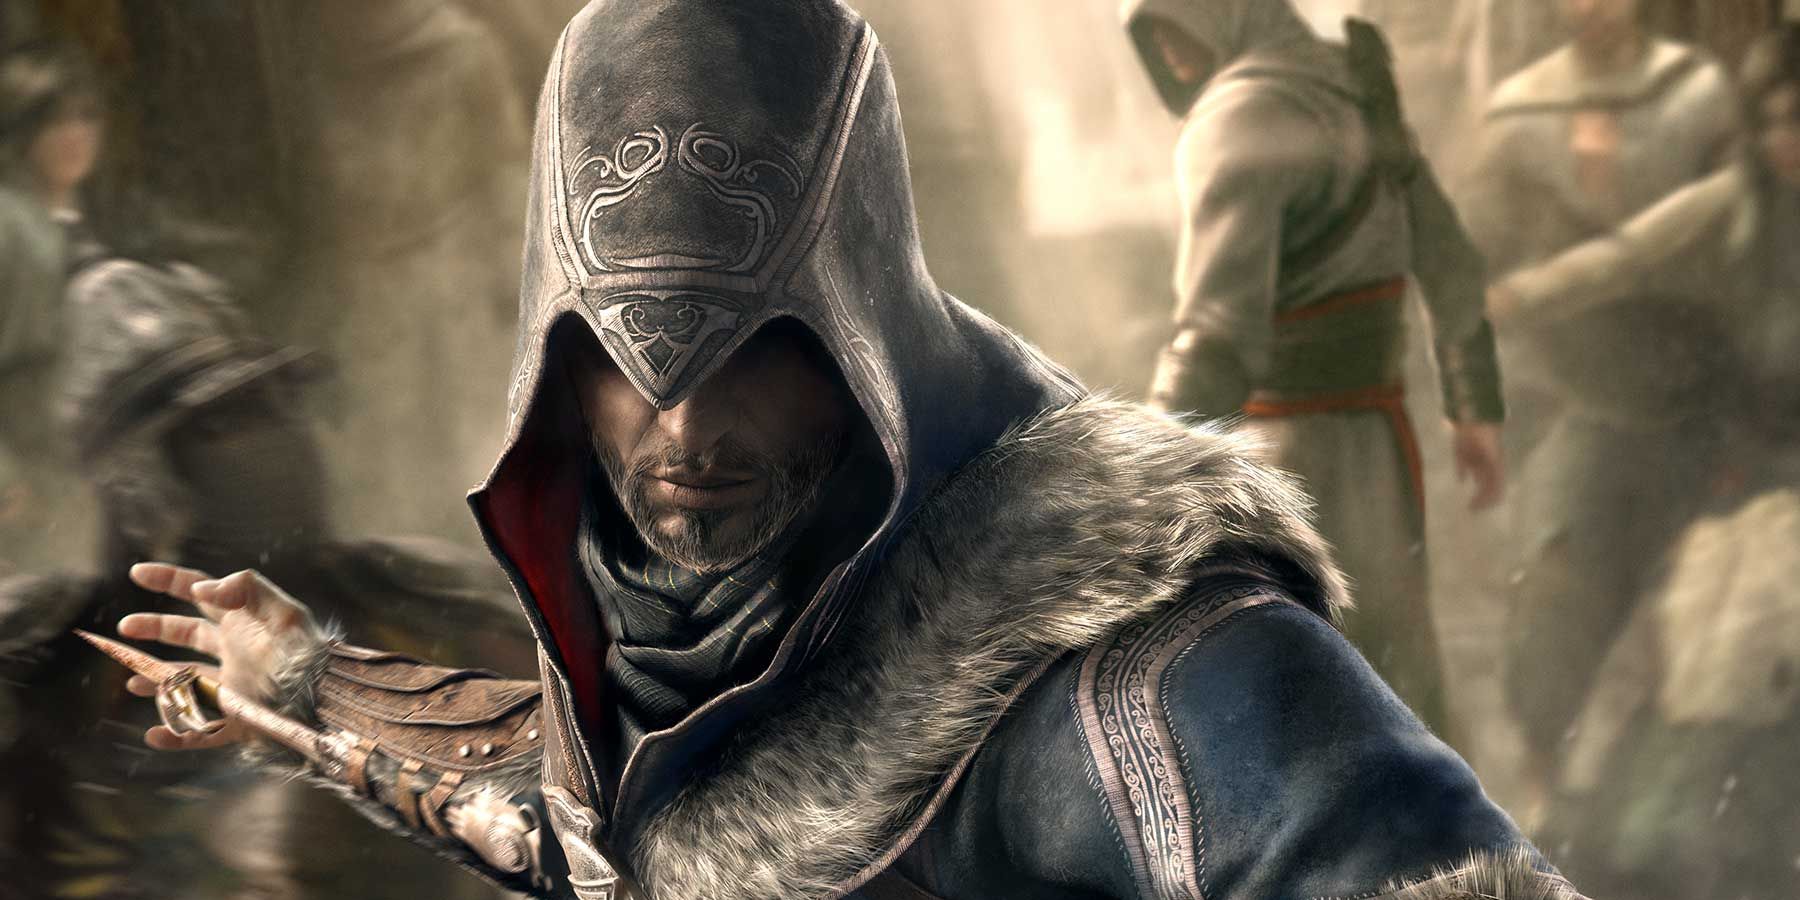 Assassin's Creed Revelations Ezio with Altair in the background